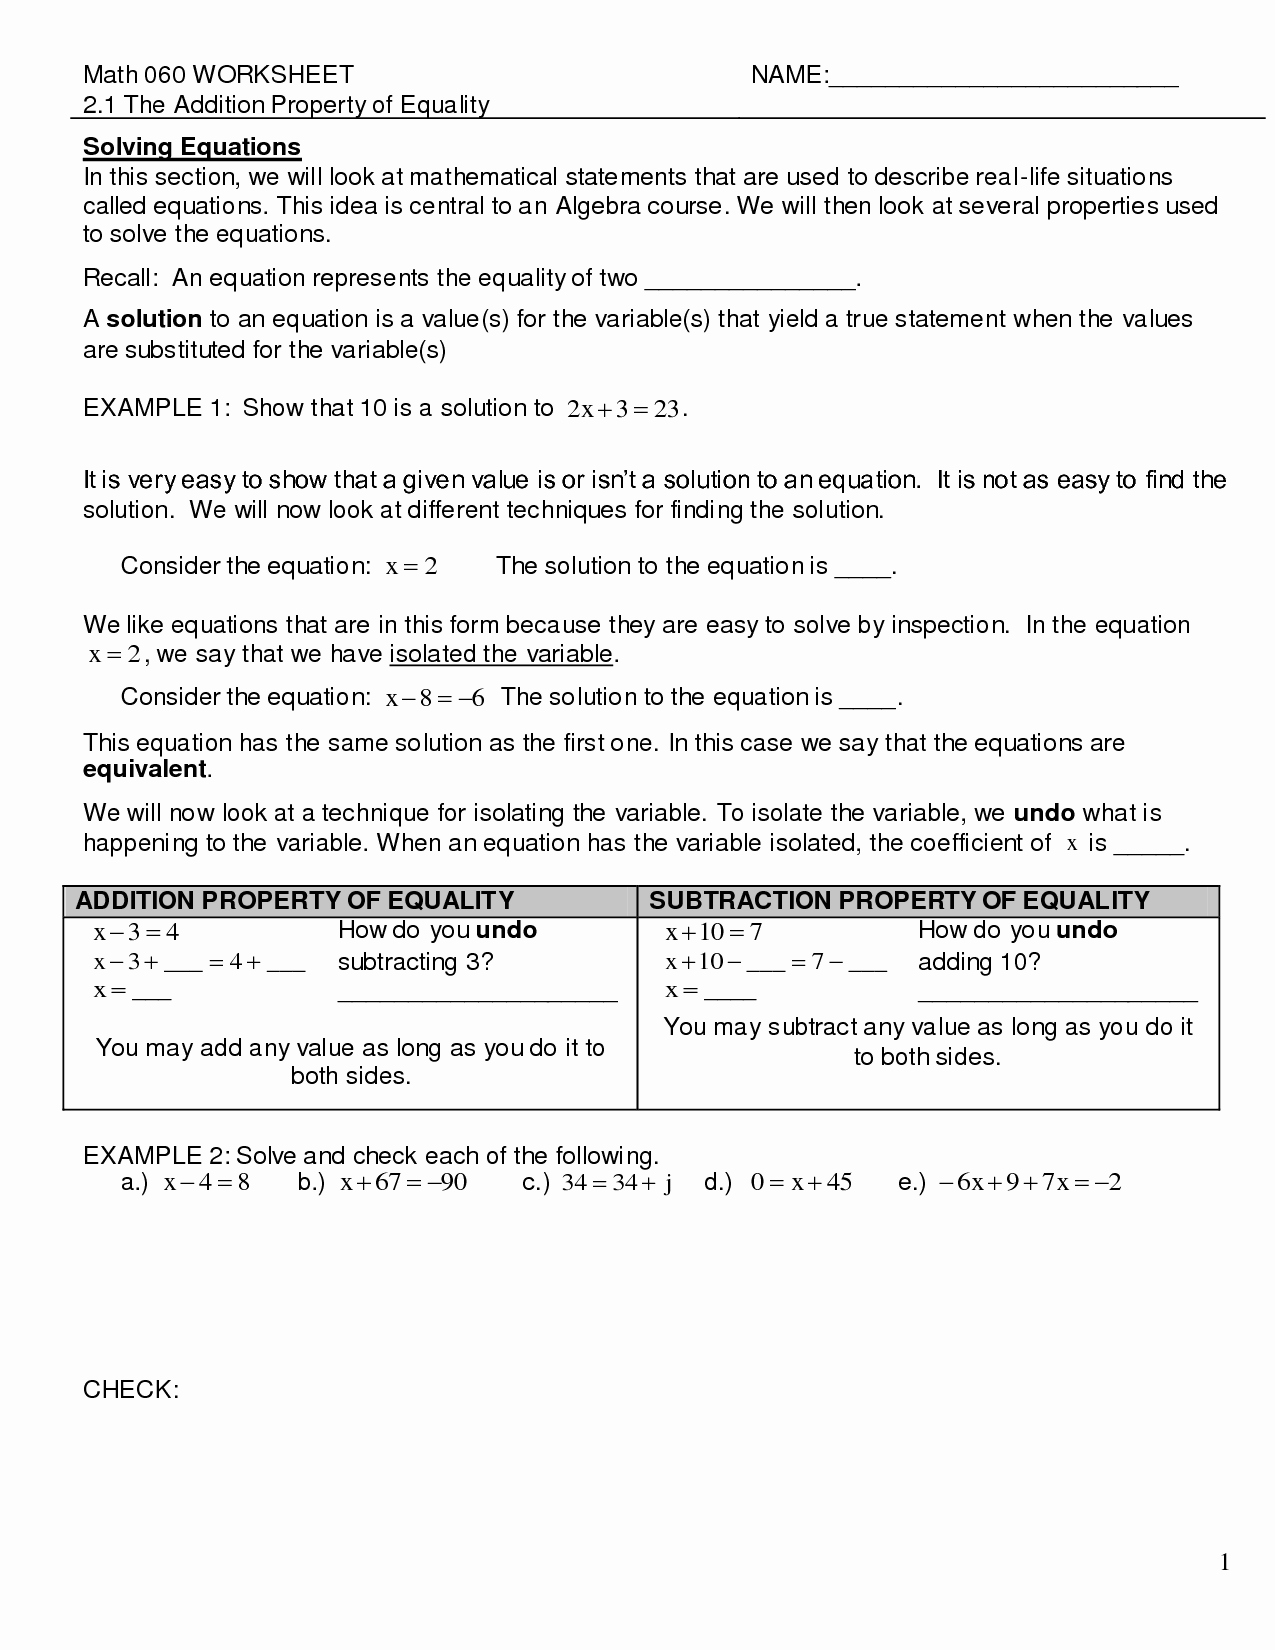 Properties Of Equality Worksheet Lovely 12 Best Of Equality Property Addition Worksheets